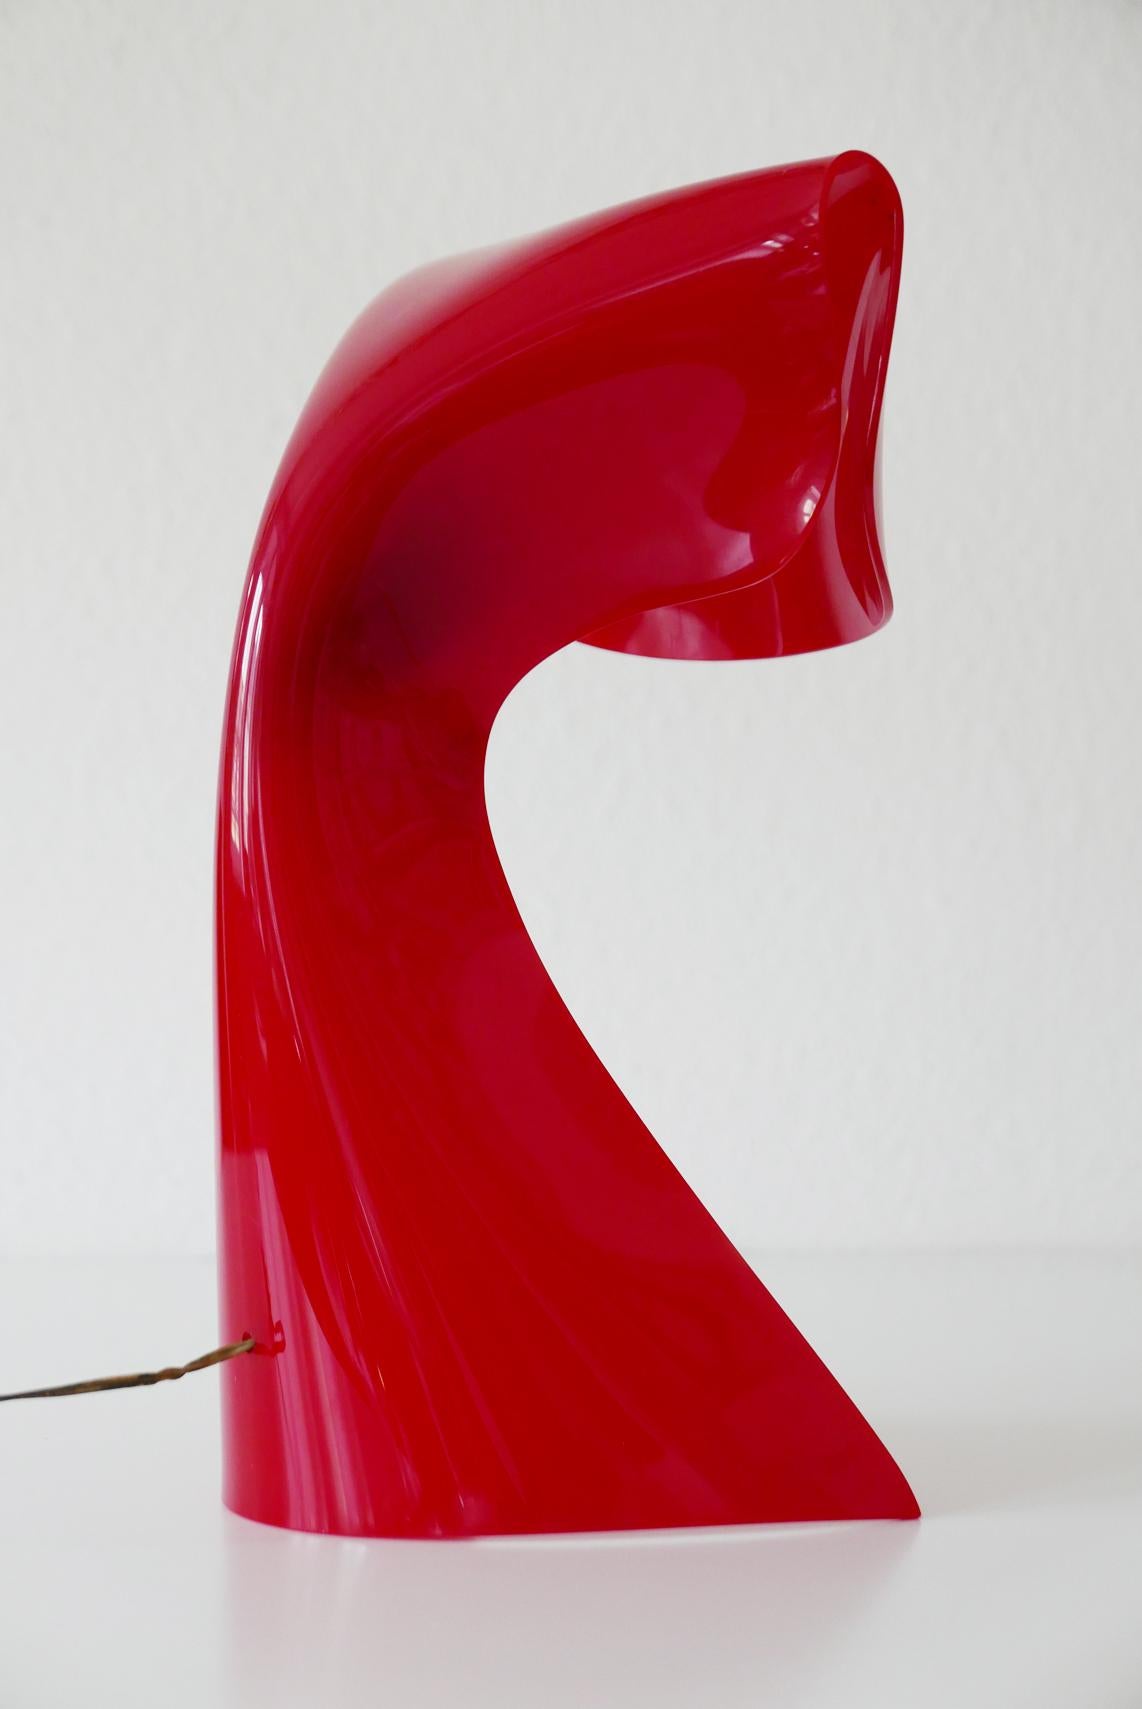 Exceptional Table Lamp by Hanns Hoffmann-Lederer for Heinz Hecht, 1950s, Germany For Sale 4